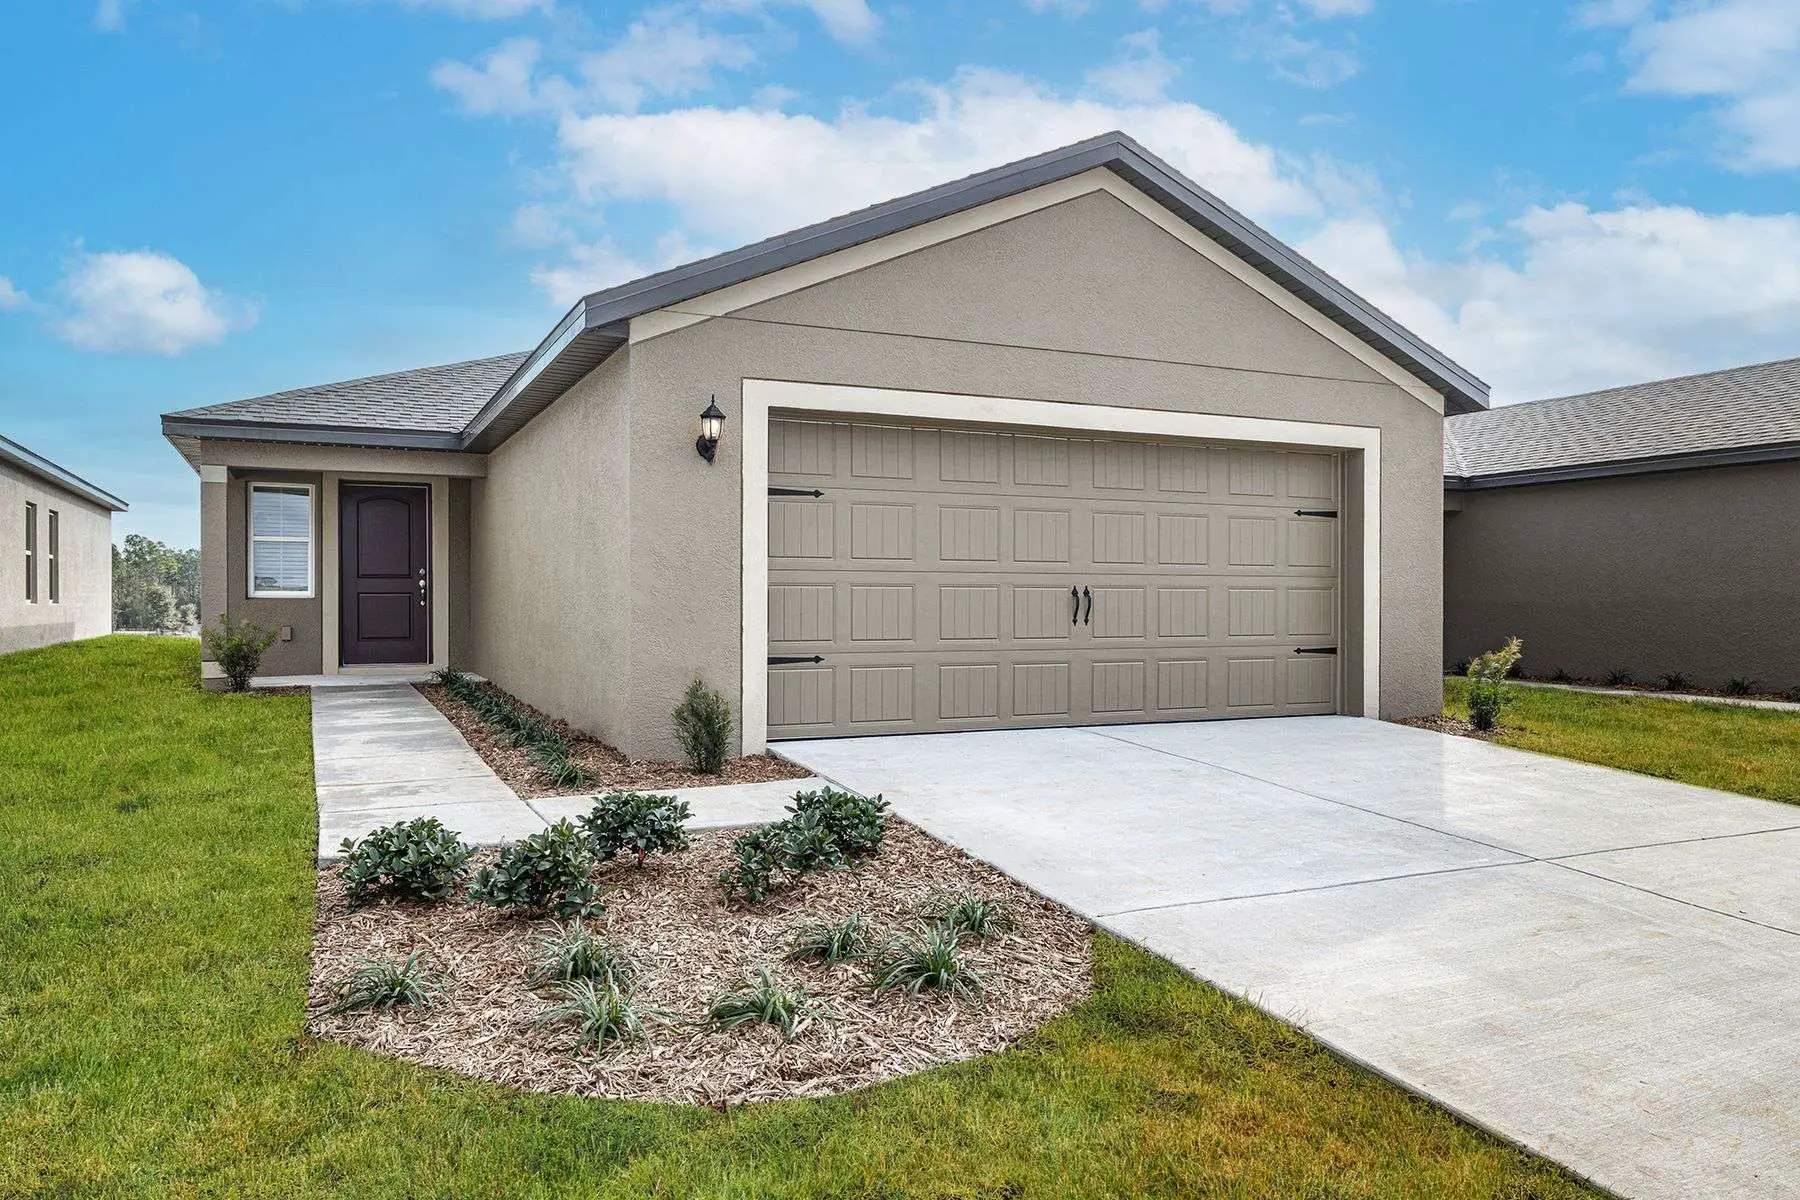 Highlands Plan at Trilby Crossing in Brooksville, FL by ...